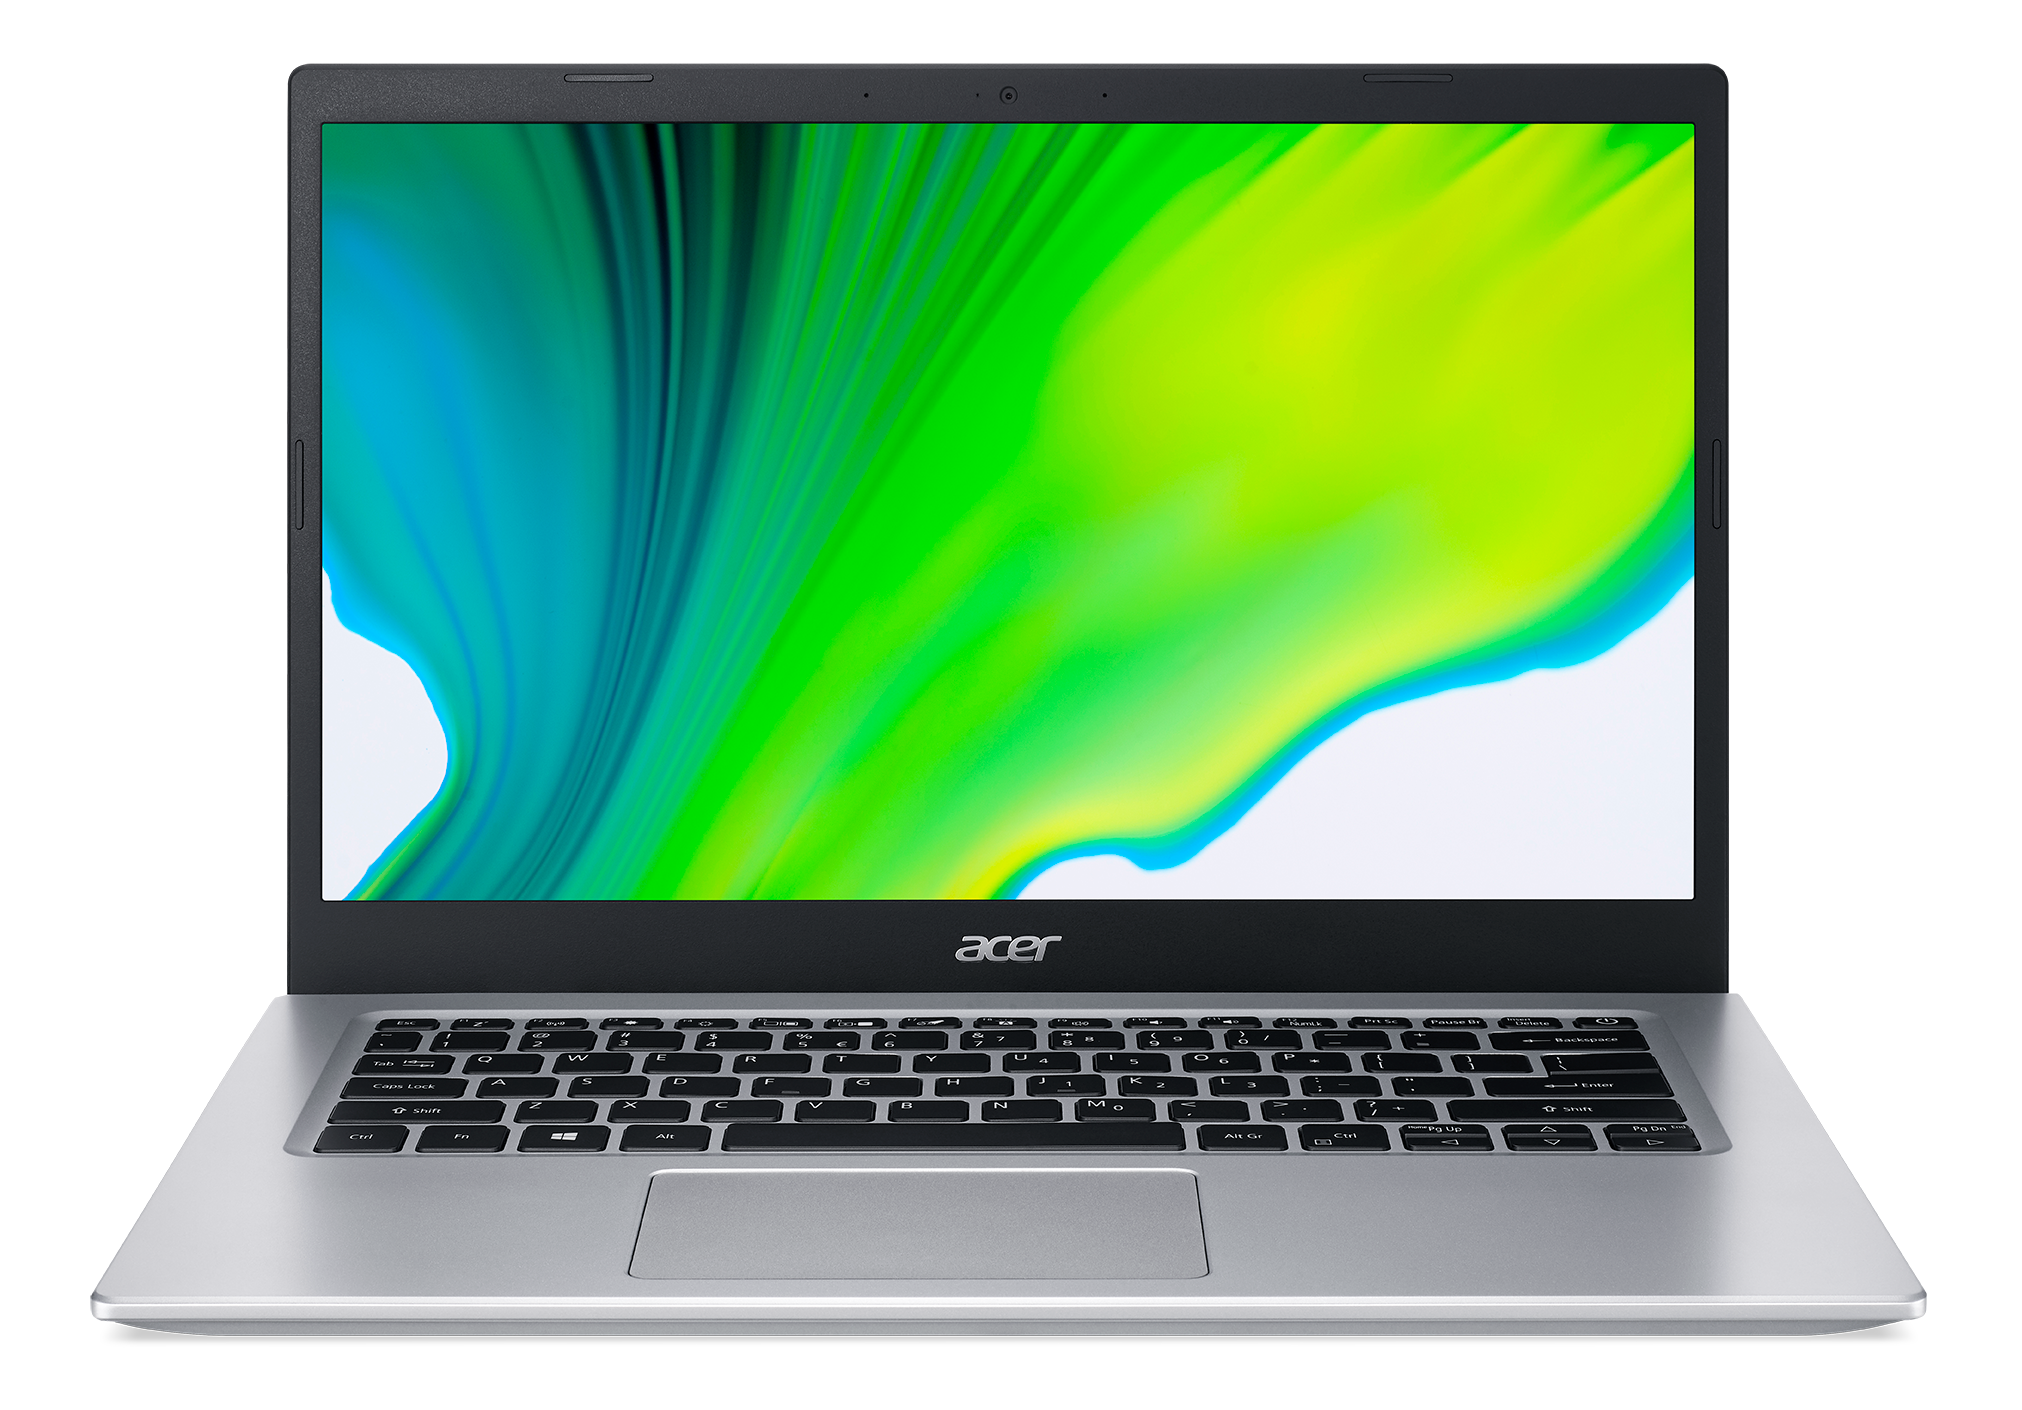 Acer Aspire 5, 14.0" Full HD IPS Display, 11th Gen Intel Core i5-1135G7, 8GB DDR4, 256GB M.2 NVMe PCIe SSD, Wi-Fi 6 AX201 802.11ax, Safari Gold, Windows 11 Home, A514-54-501Z - image 2 of 6